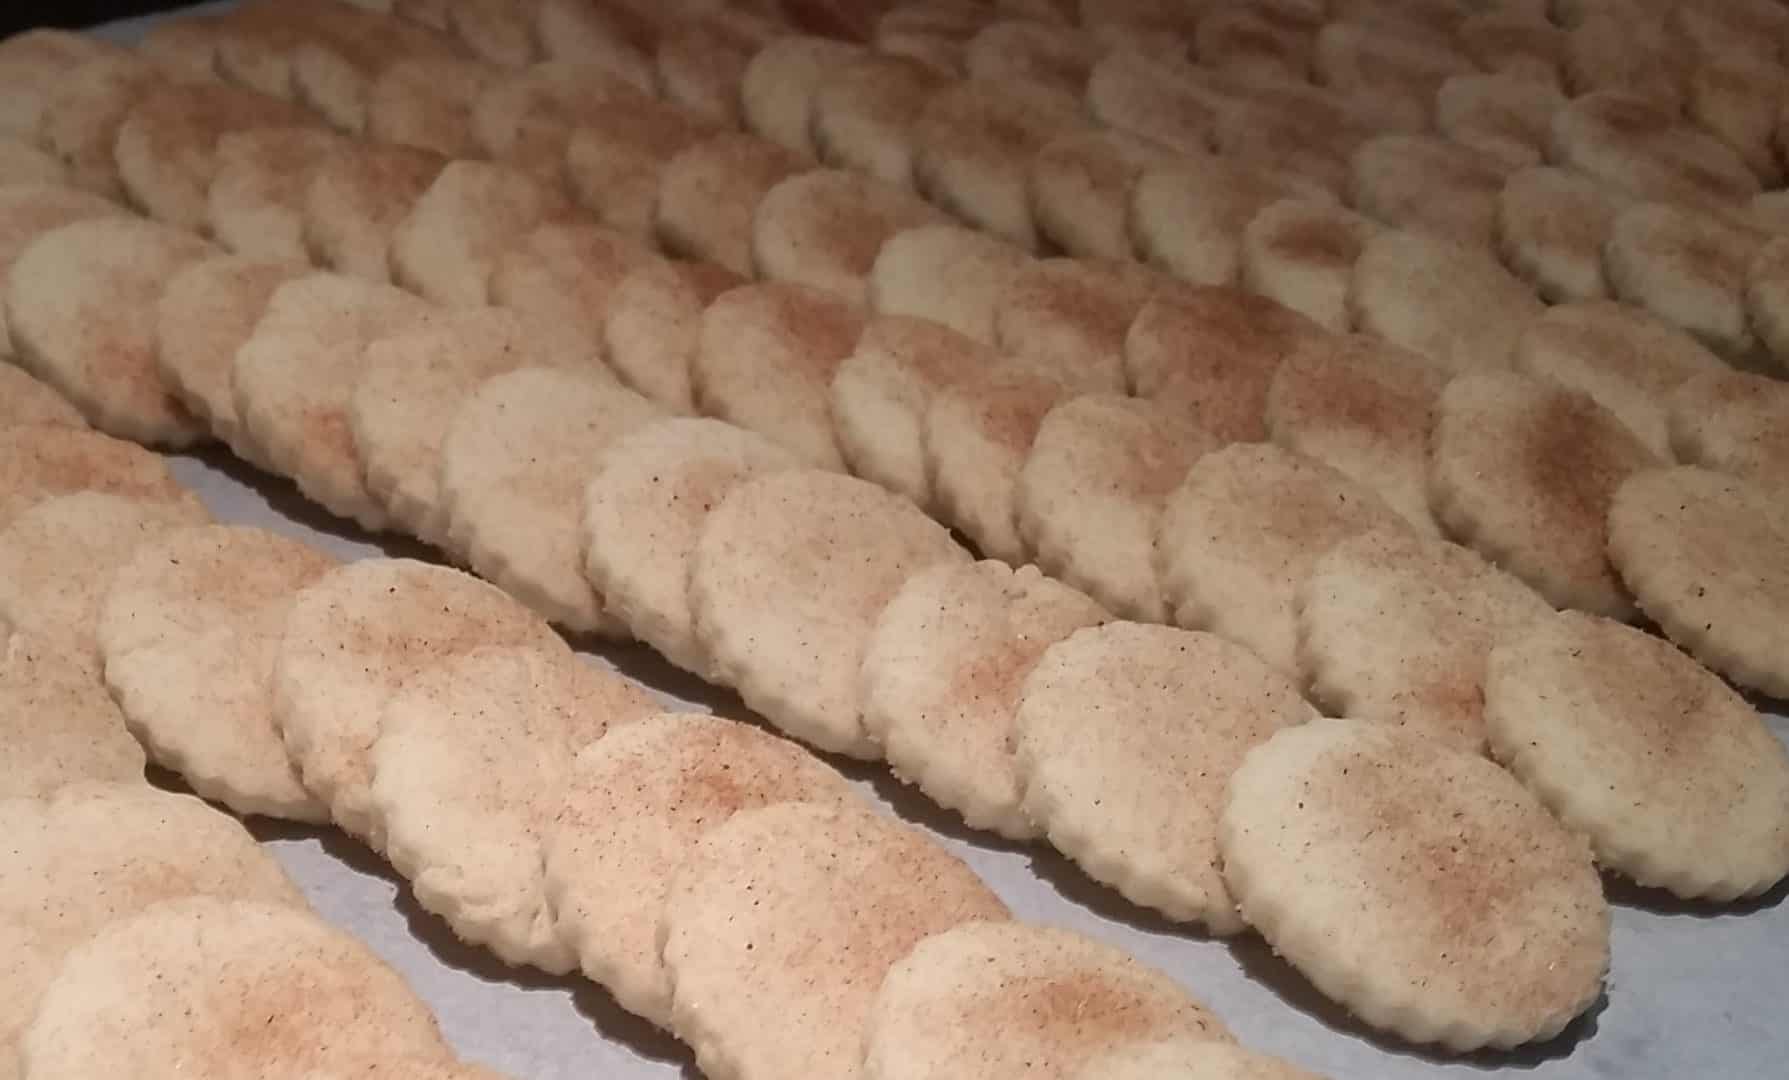 Rows of fresh baked bizcochito cookies on a baking sheet